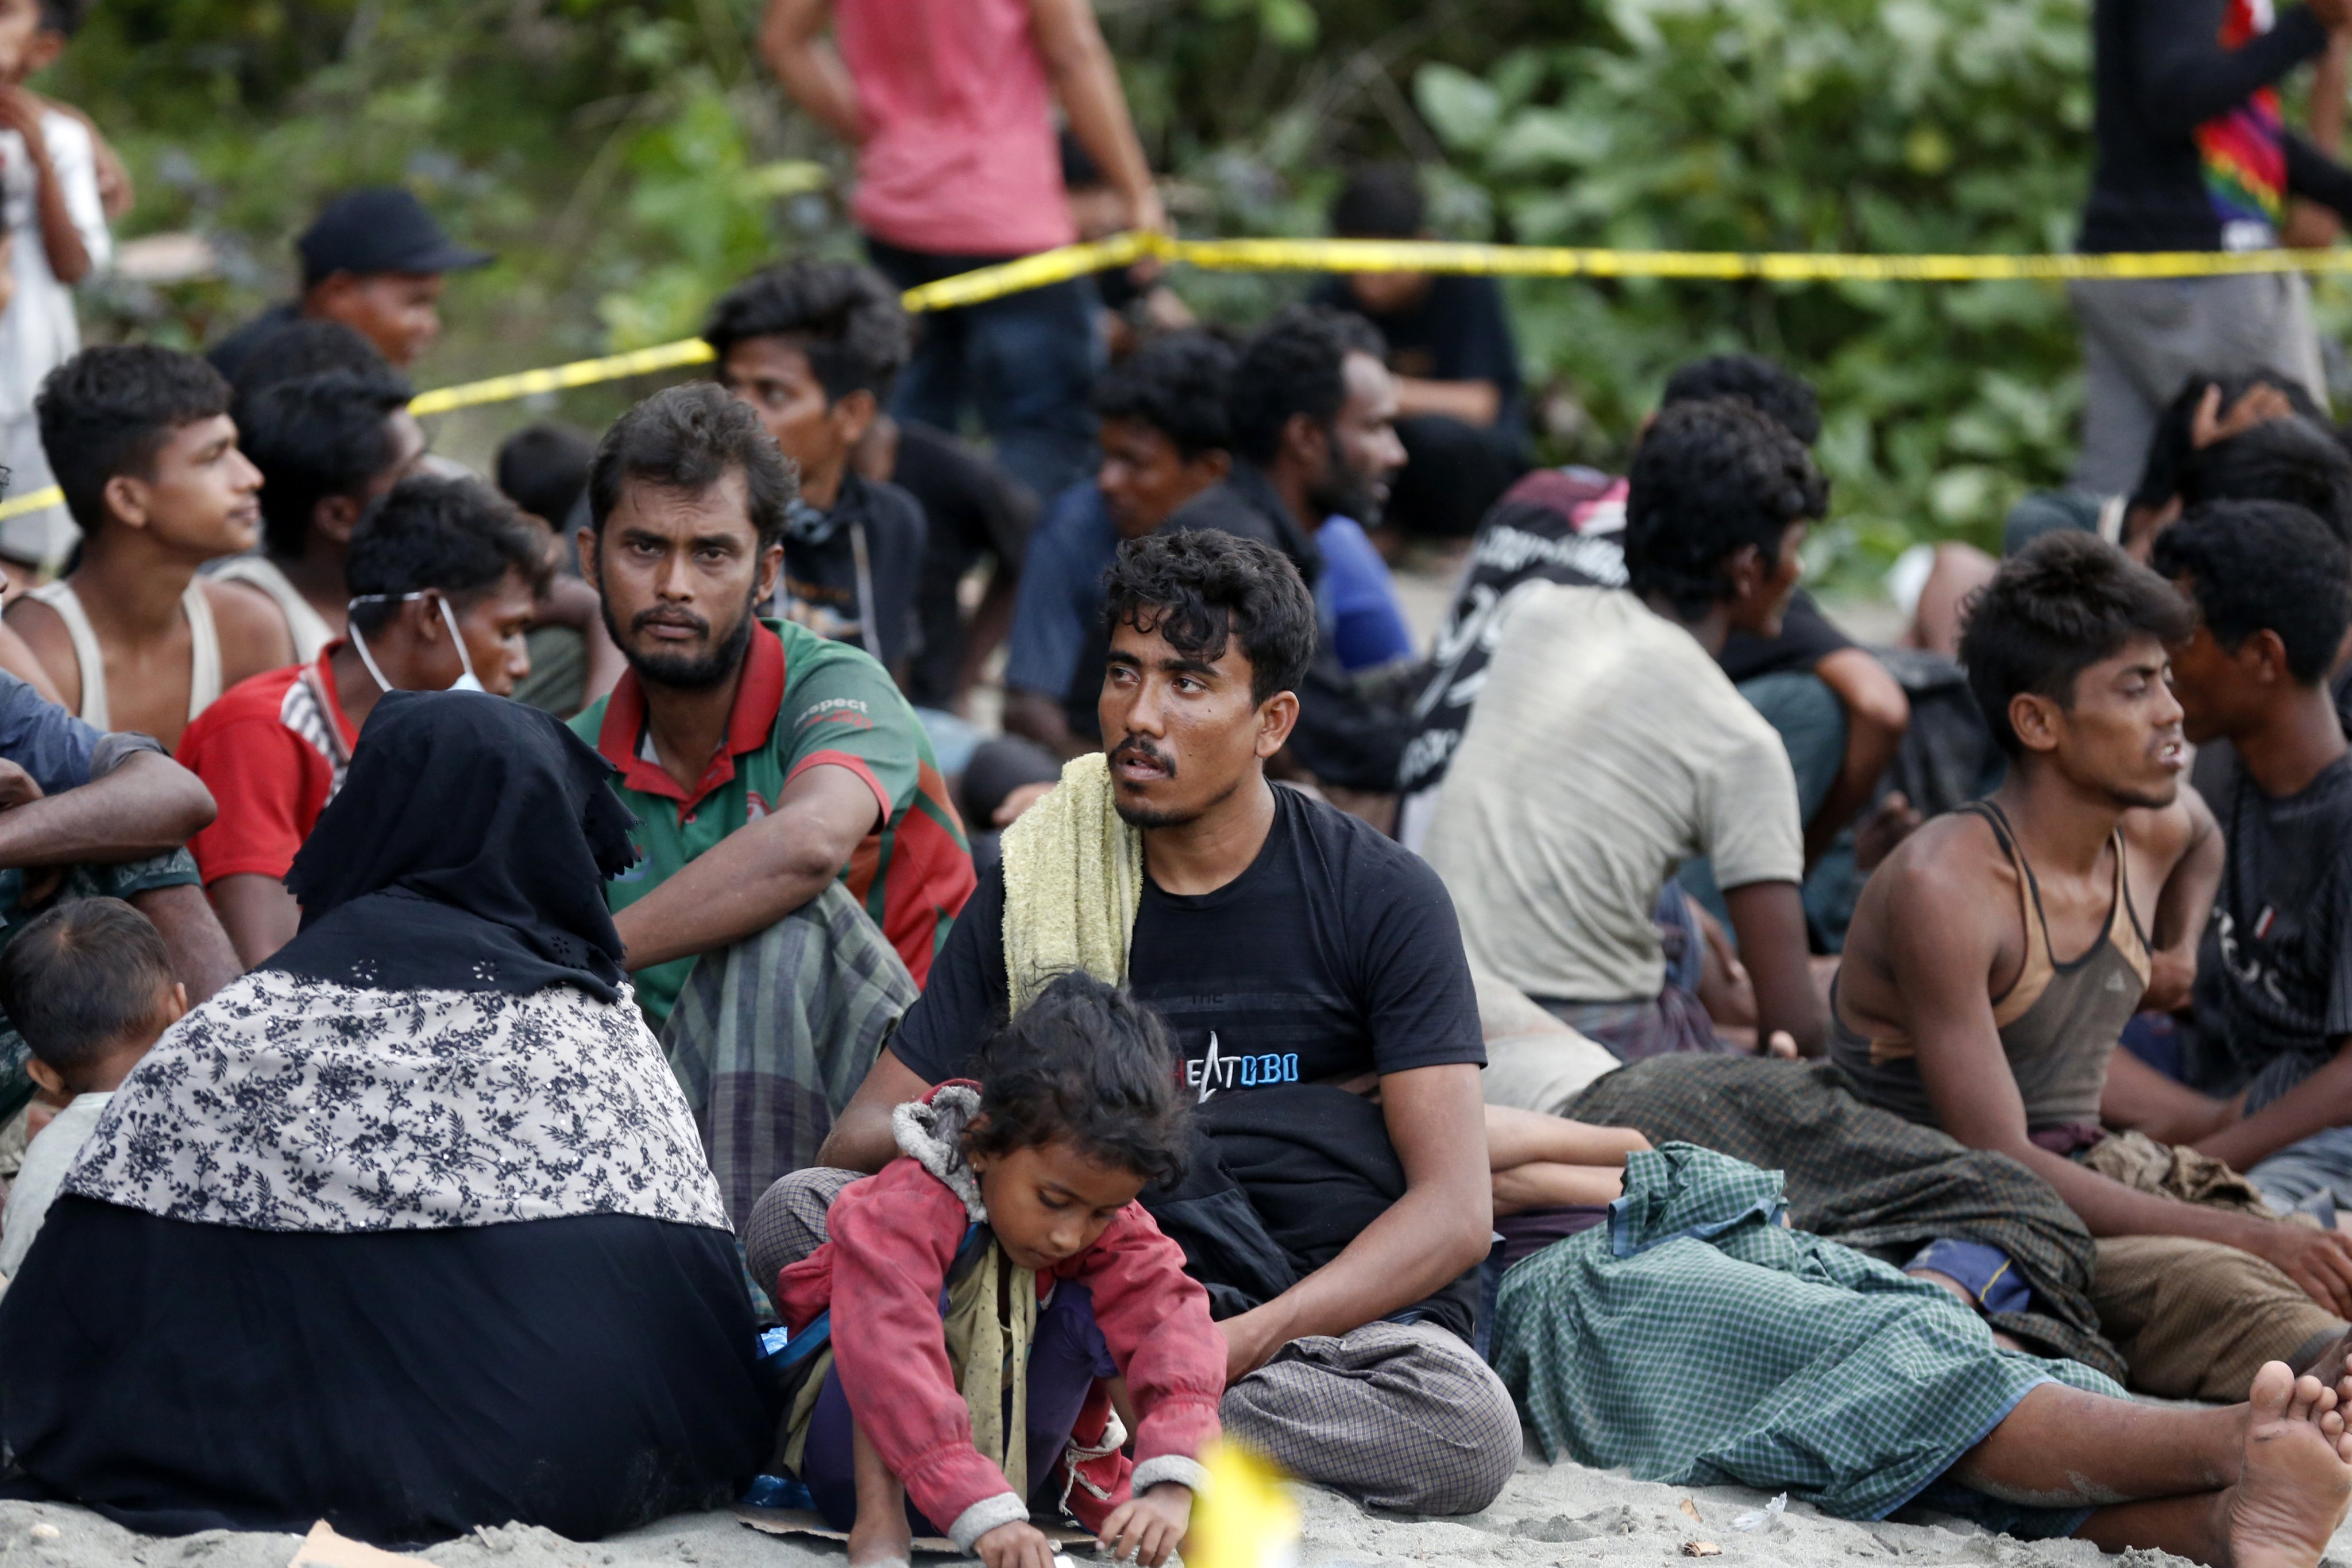 Rohingya refugees rest in an open area after landing on a beach at Pidie, Aceh. Photo: EPA-EFE